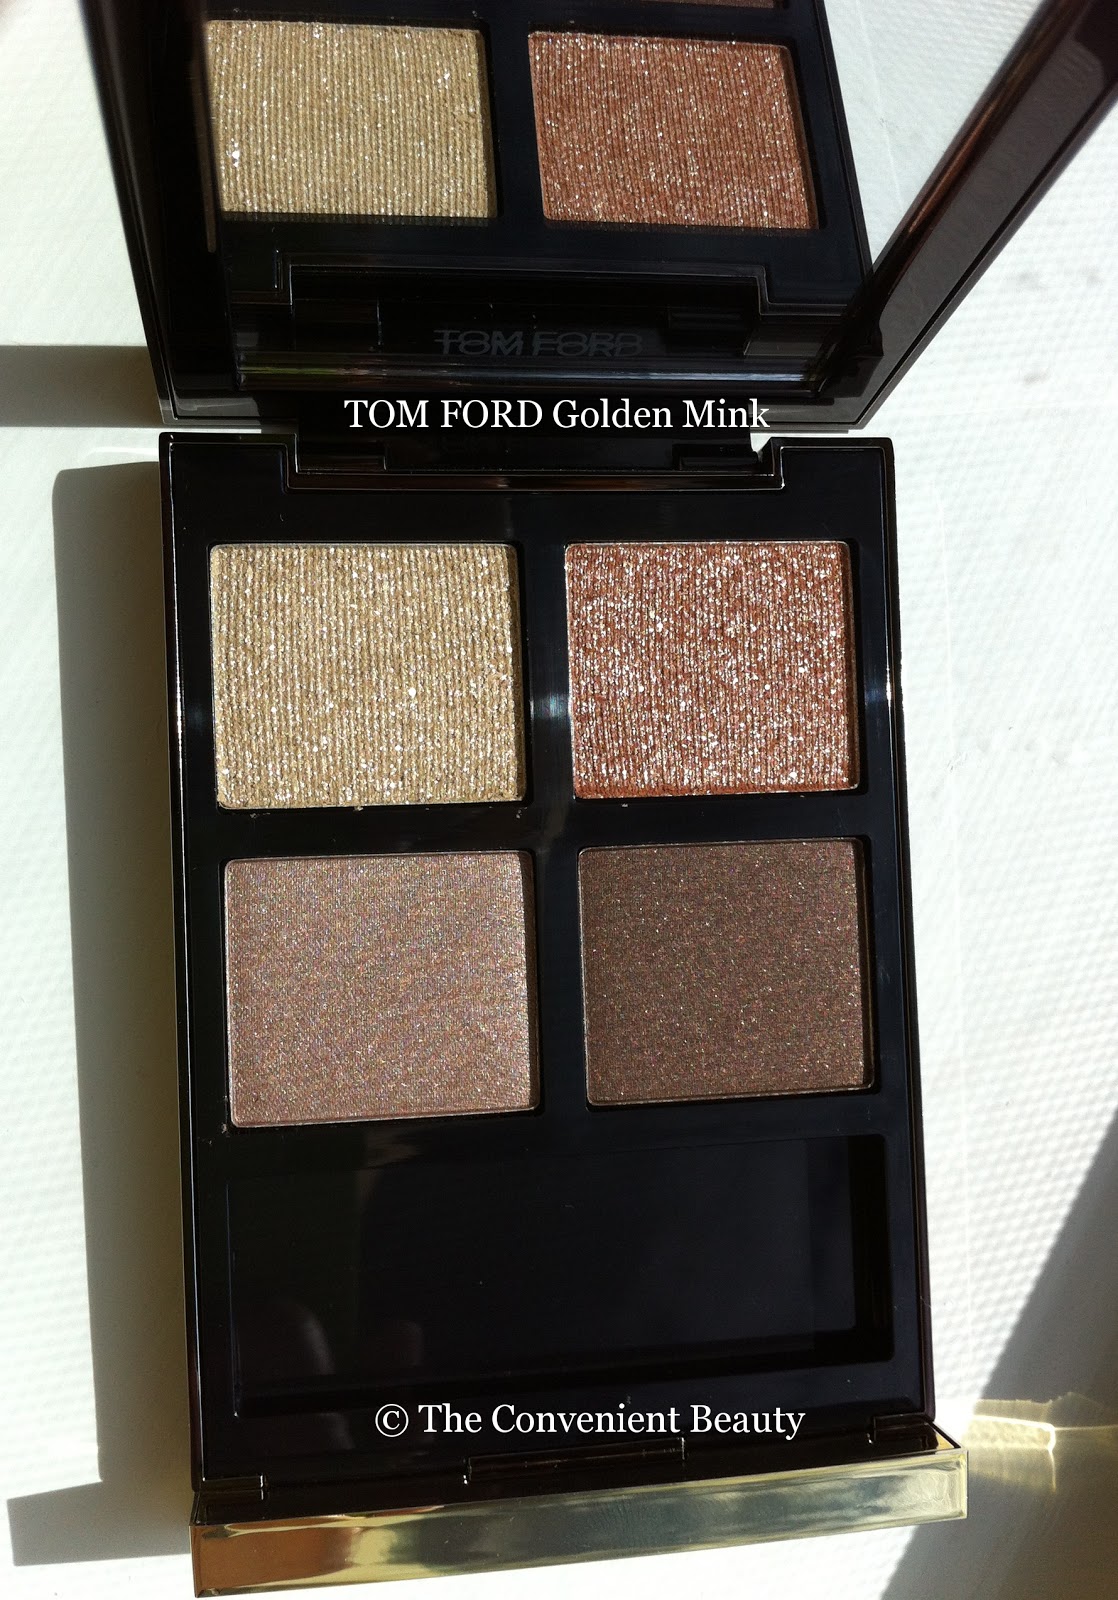 The Convenient Beauty: Review: Tom Ford Eyeshadow Quad 01 Golden Mink